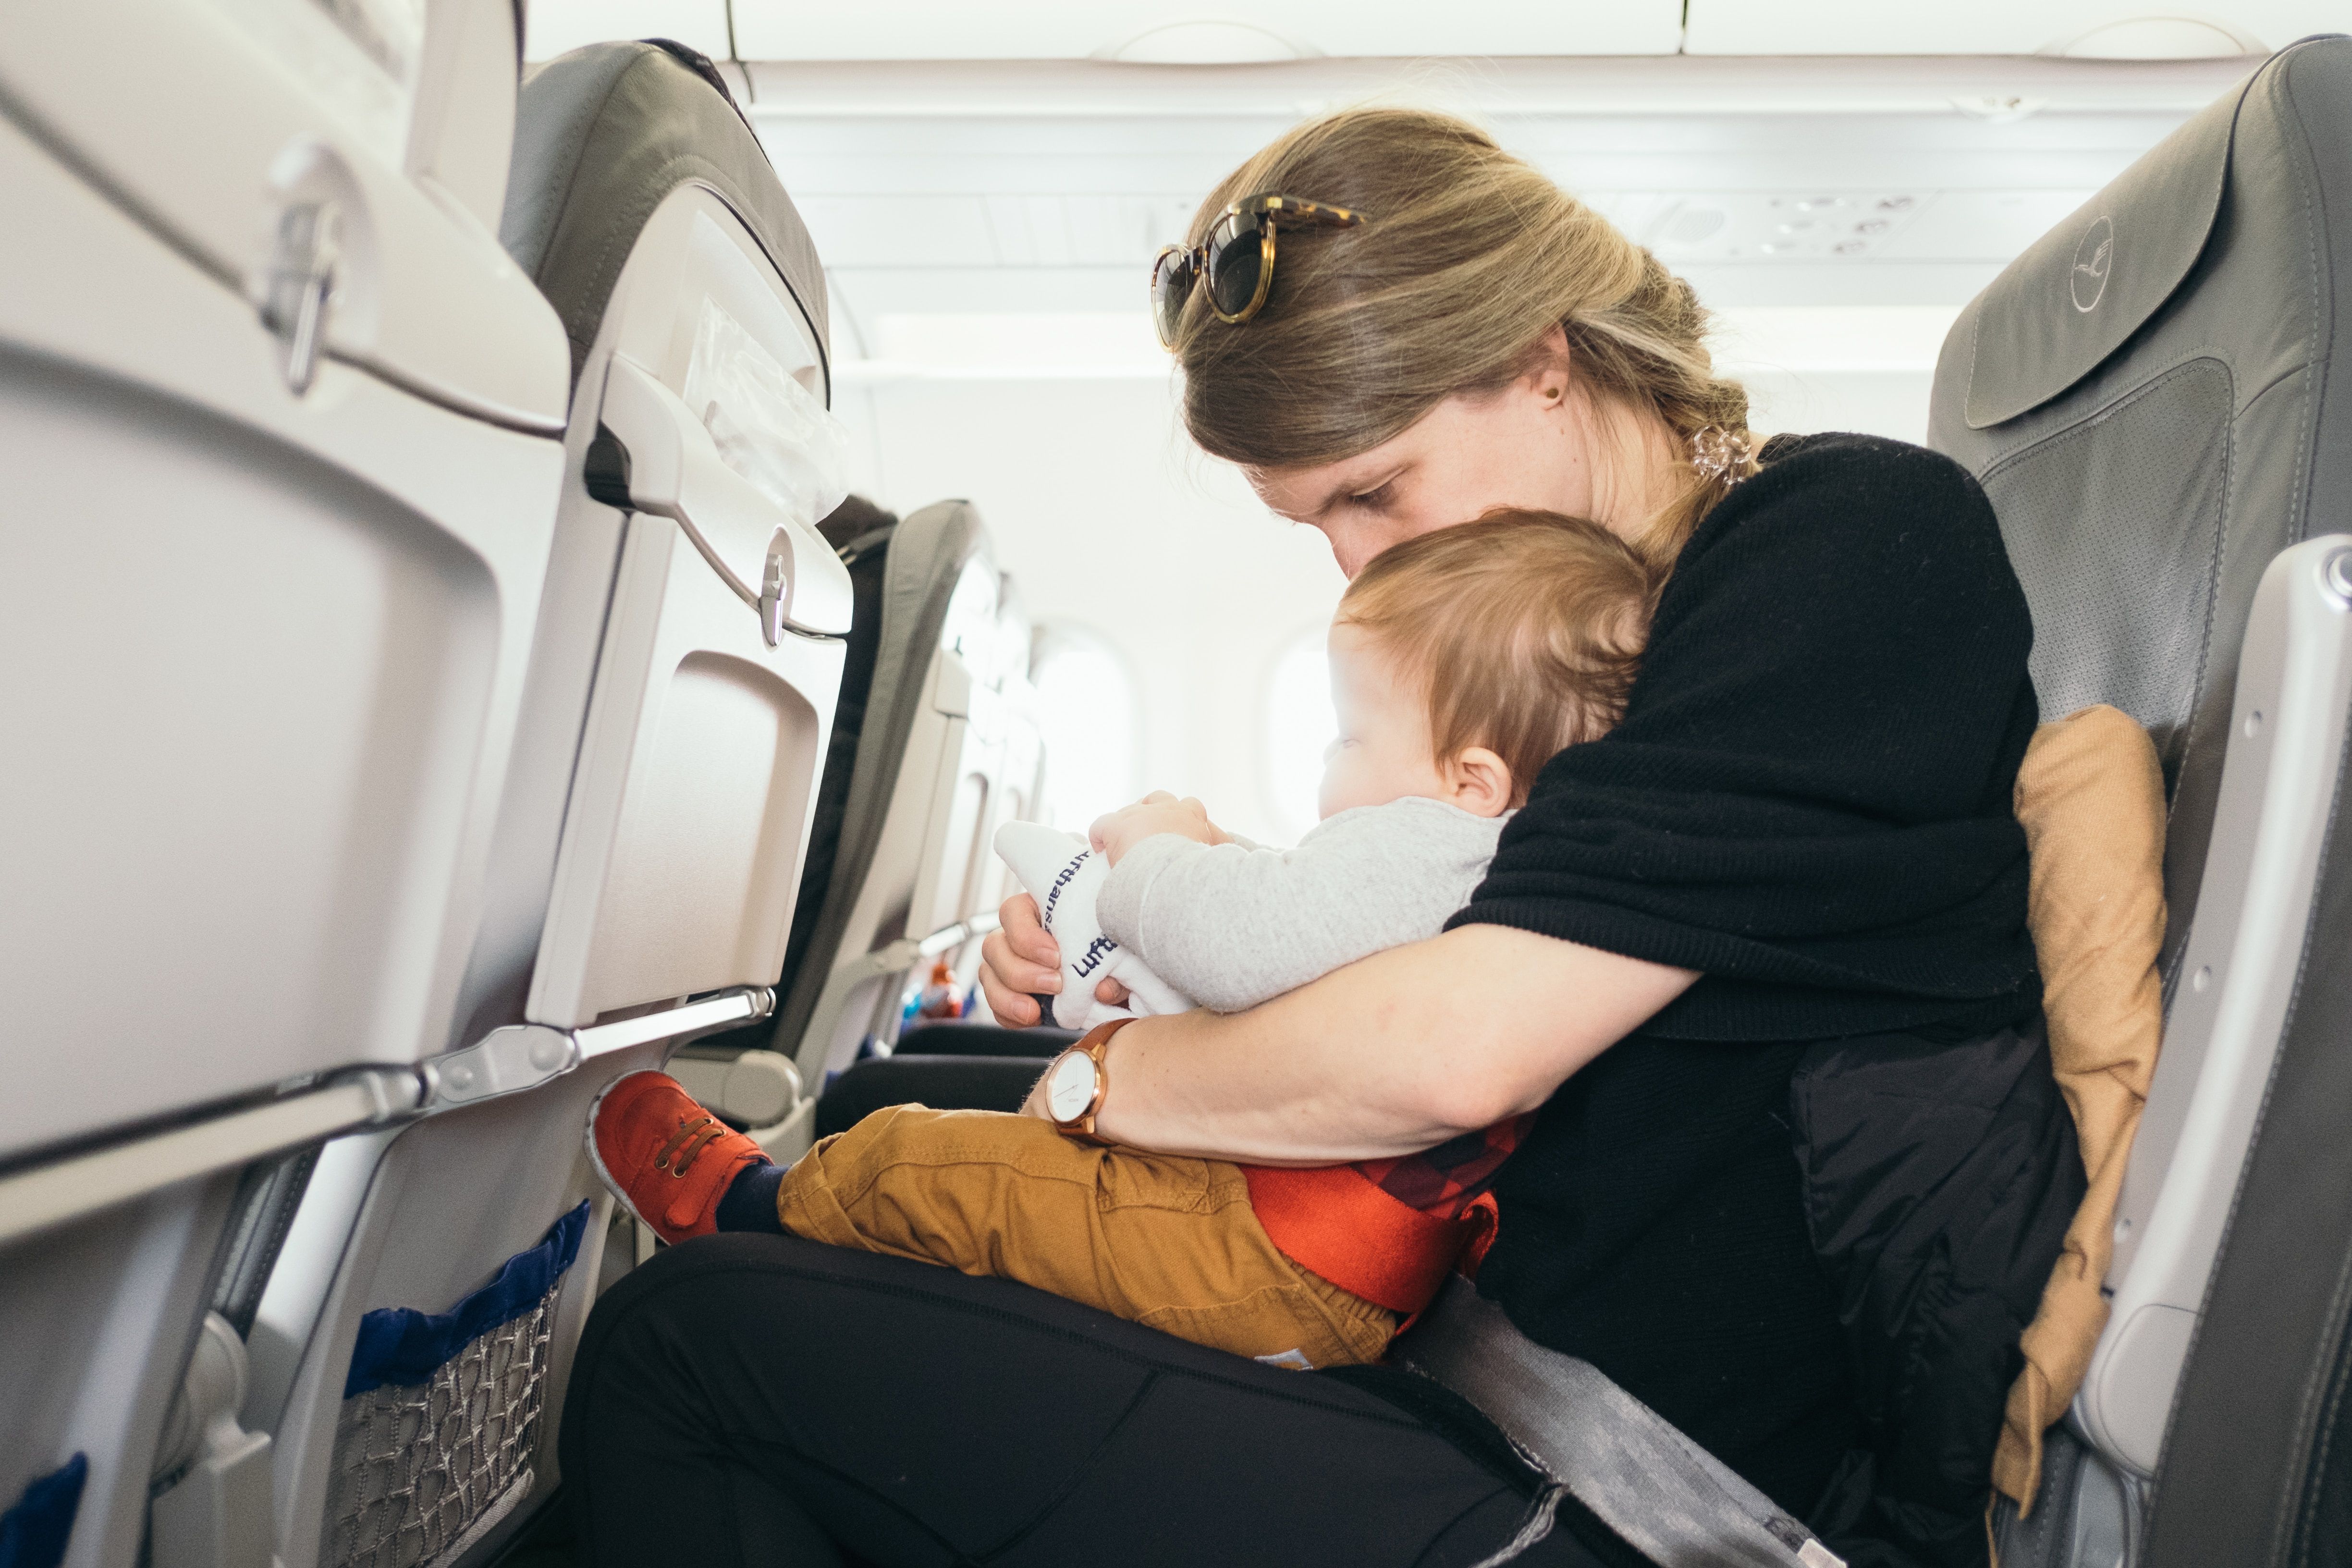 Woman and baby in a plane